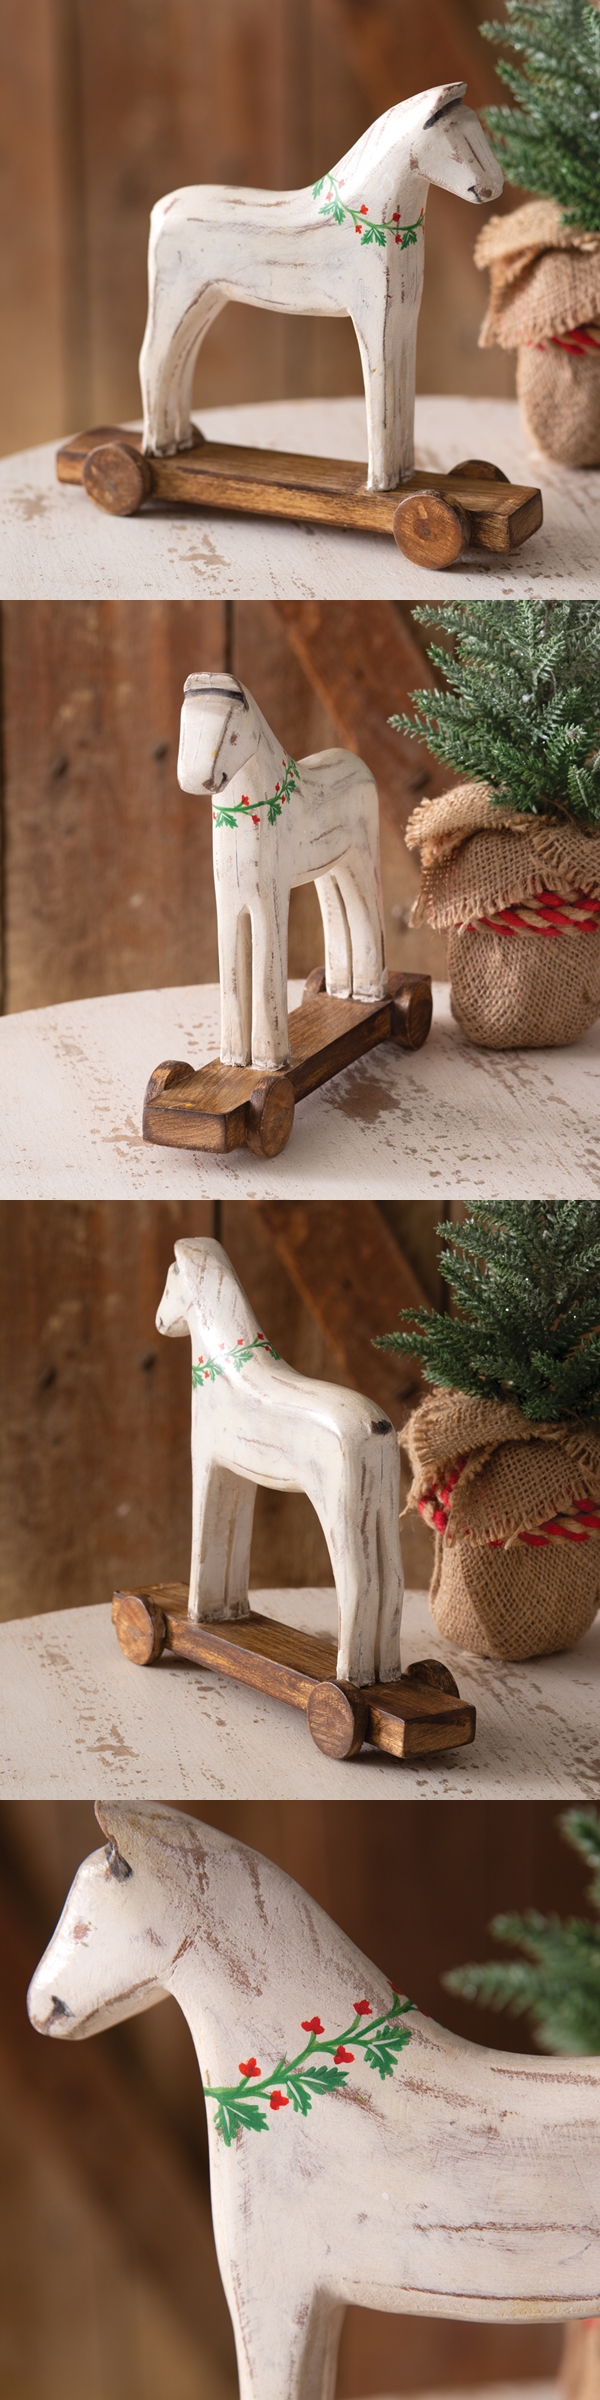 CTW Home Collection Wooden Toy Horse for Holiday Decorations